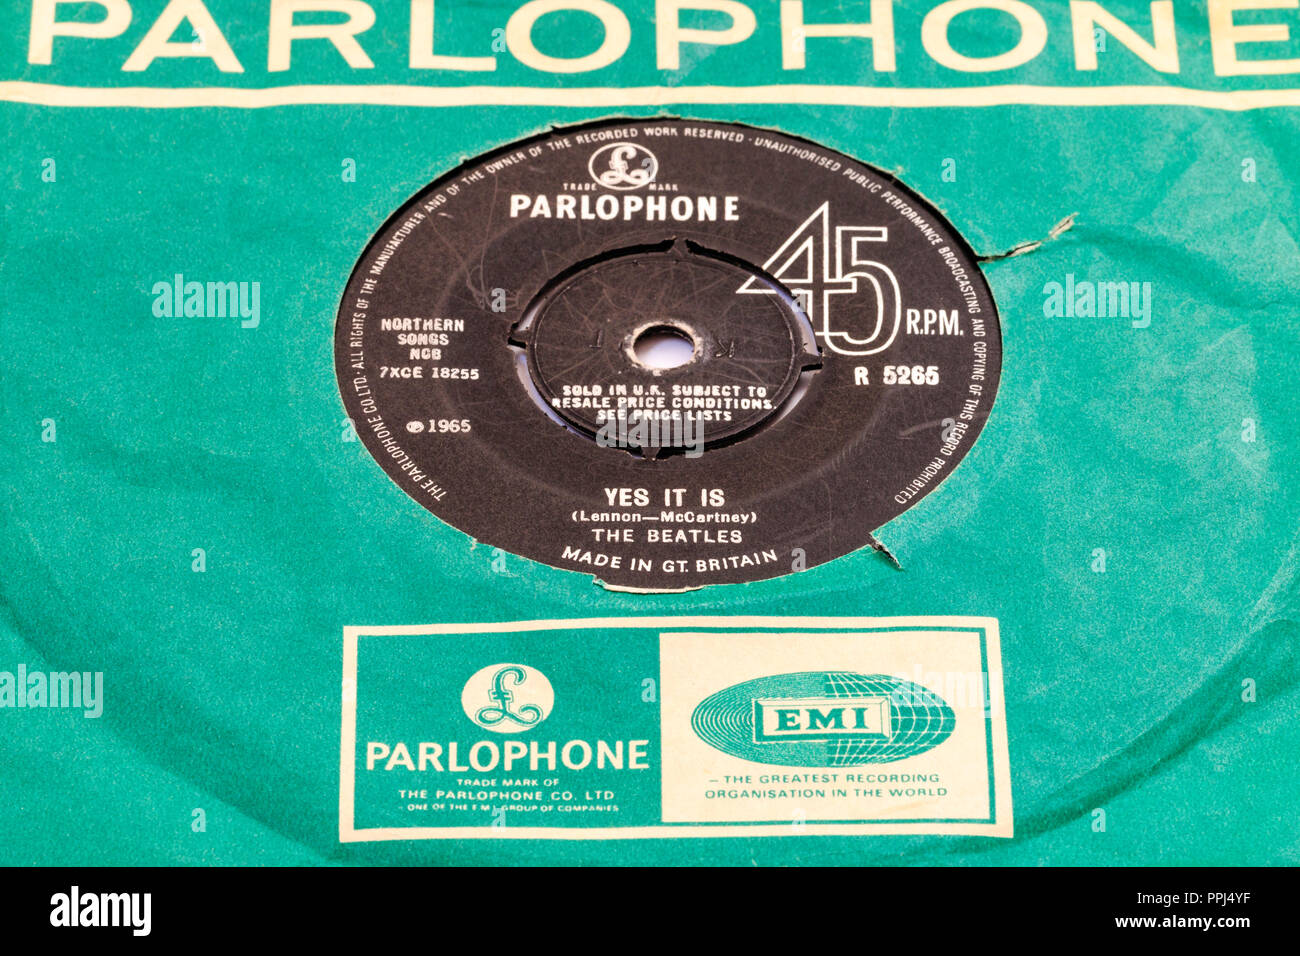 45 single track record in Parlophone green cover. The Beatles, 'Yes It Is' by Lennon and McCartney. B-side. Stock Photo